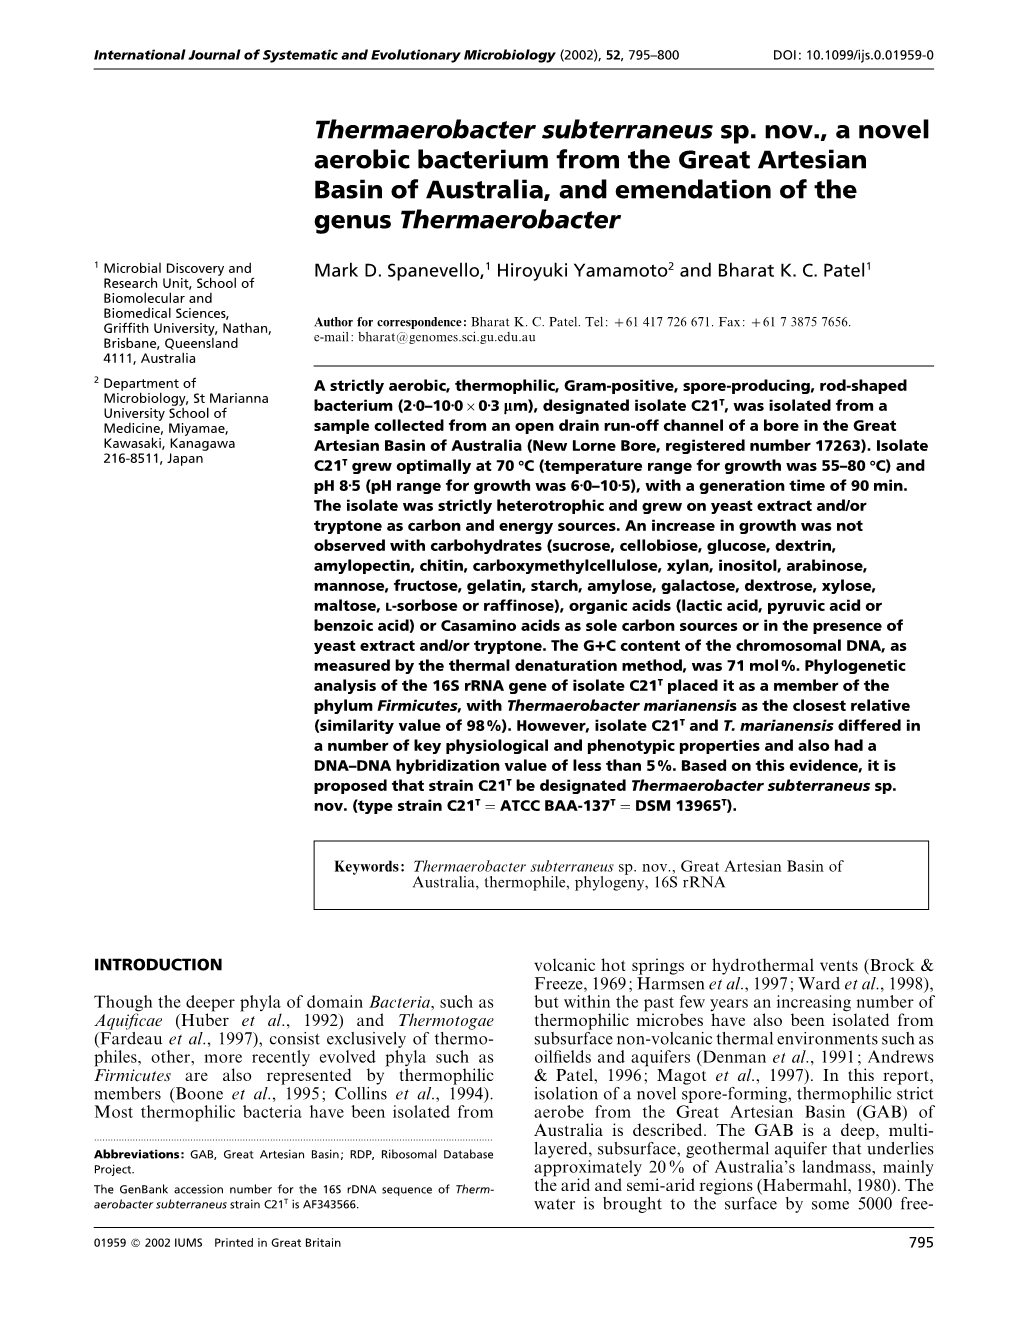 Thermaerobacter Subterraneus Sp. Nov., a Novel Aerobic Bacterium from the Great Artesian Basin of Australia, and Emendation of the Genus Thermaerobacter